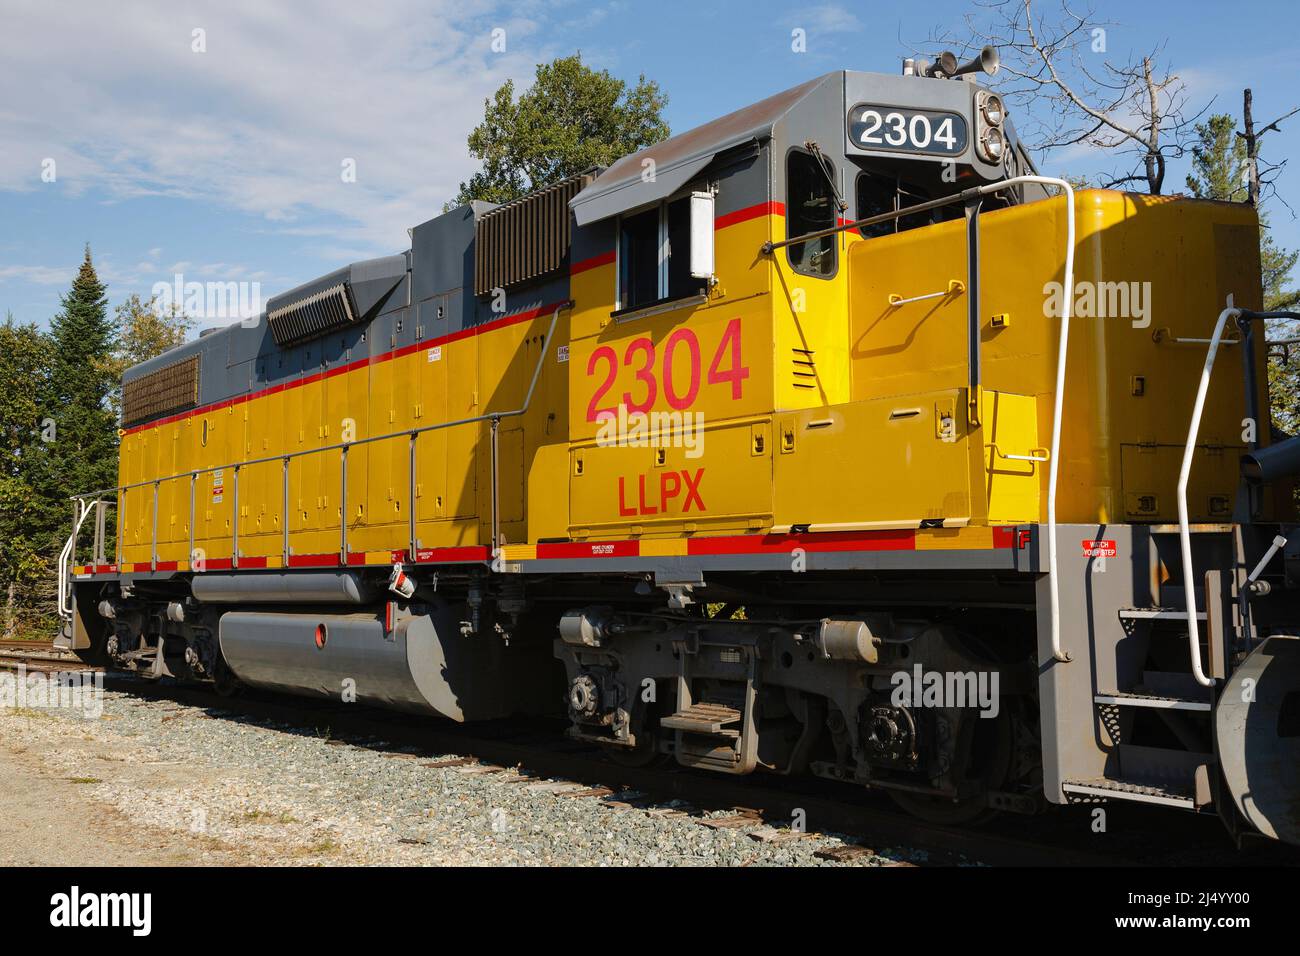 Locomotive, LLPX 2304, on railroad tracks in Whitefield, New Hampshire. Stock Photo